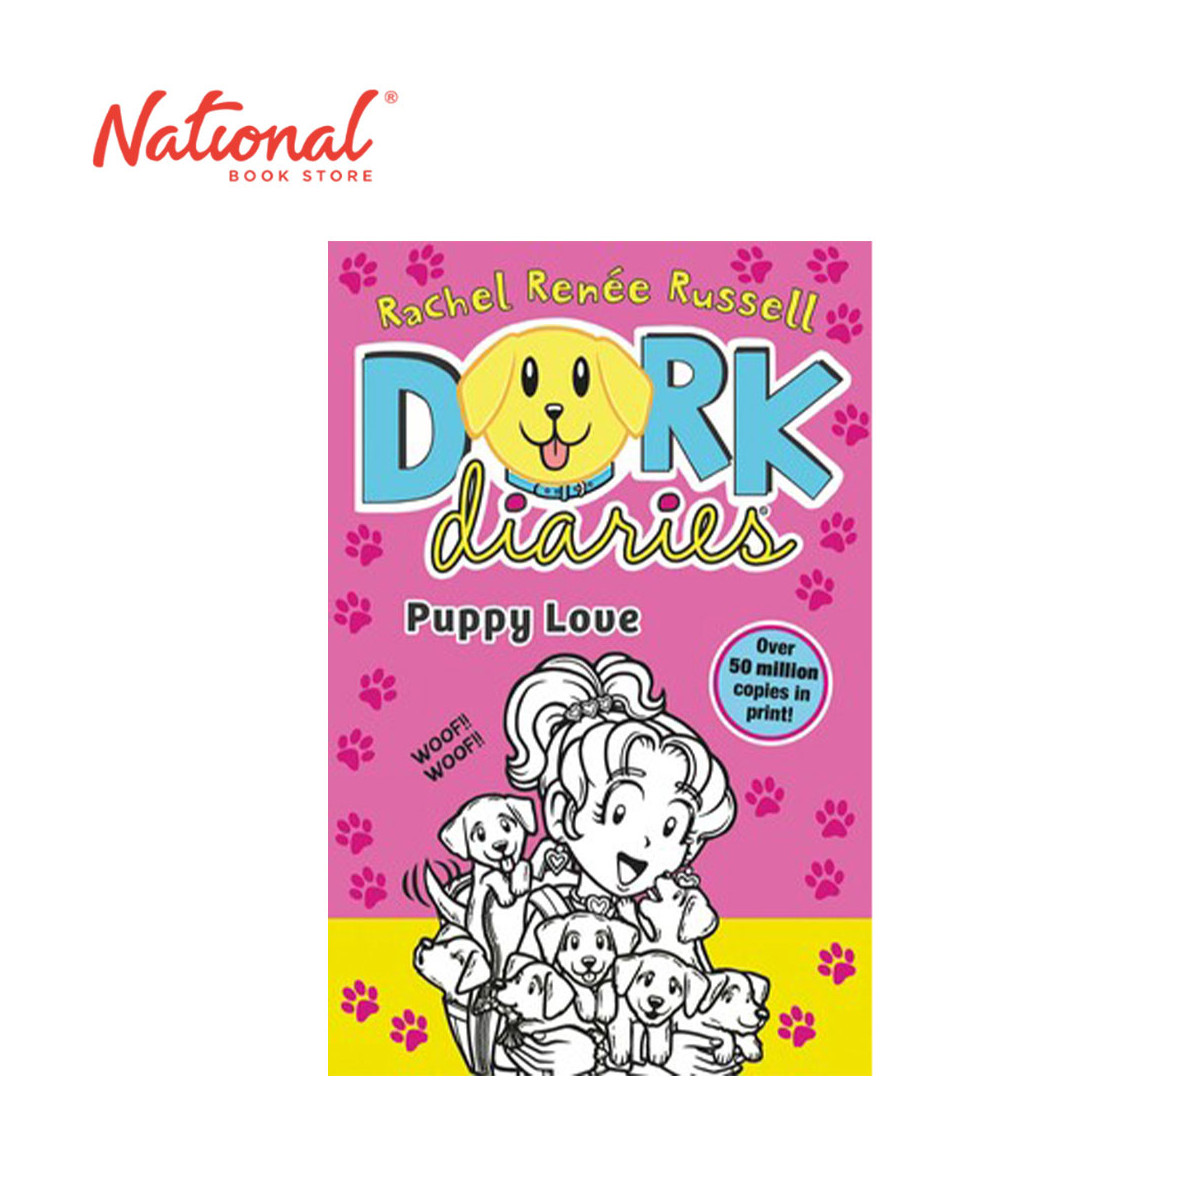 Dork Diaries 10: Puppy Love UK New Cover By Rachel Renee Russell - Trade Paperback - Children's Book